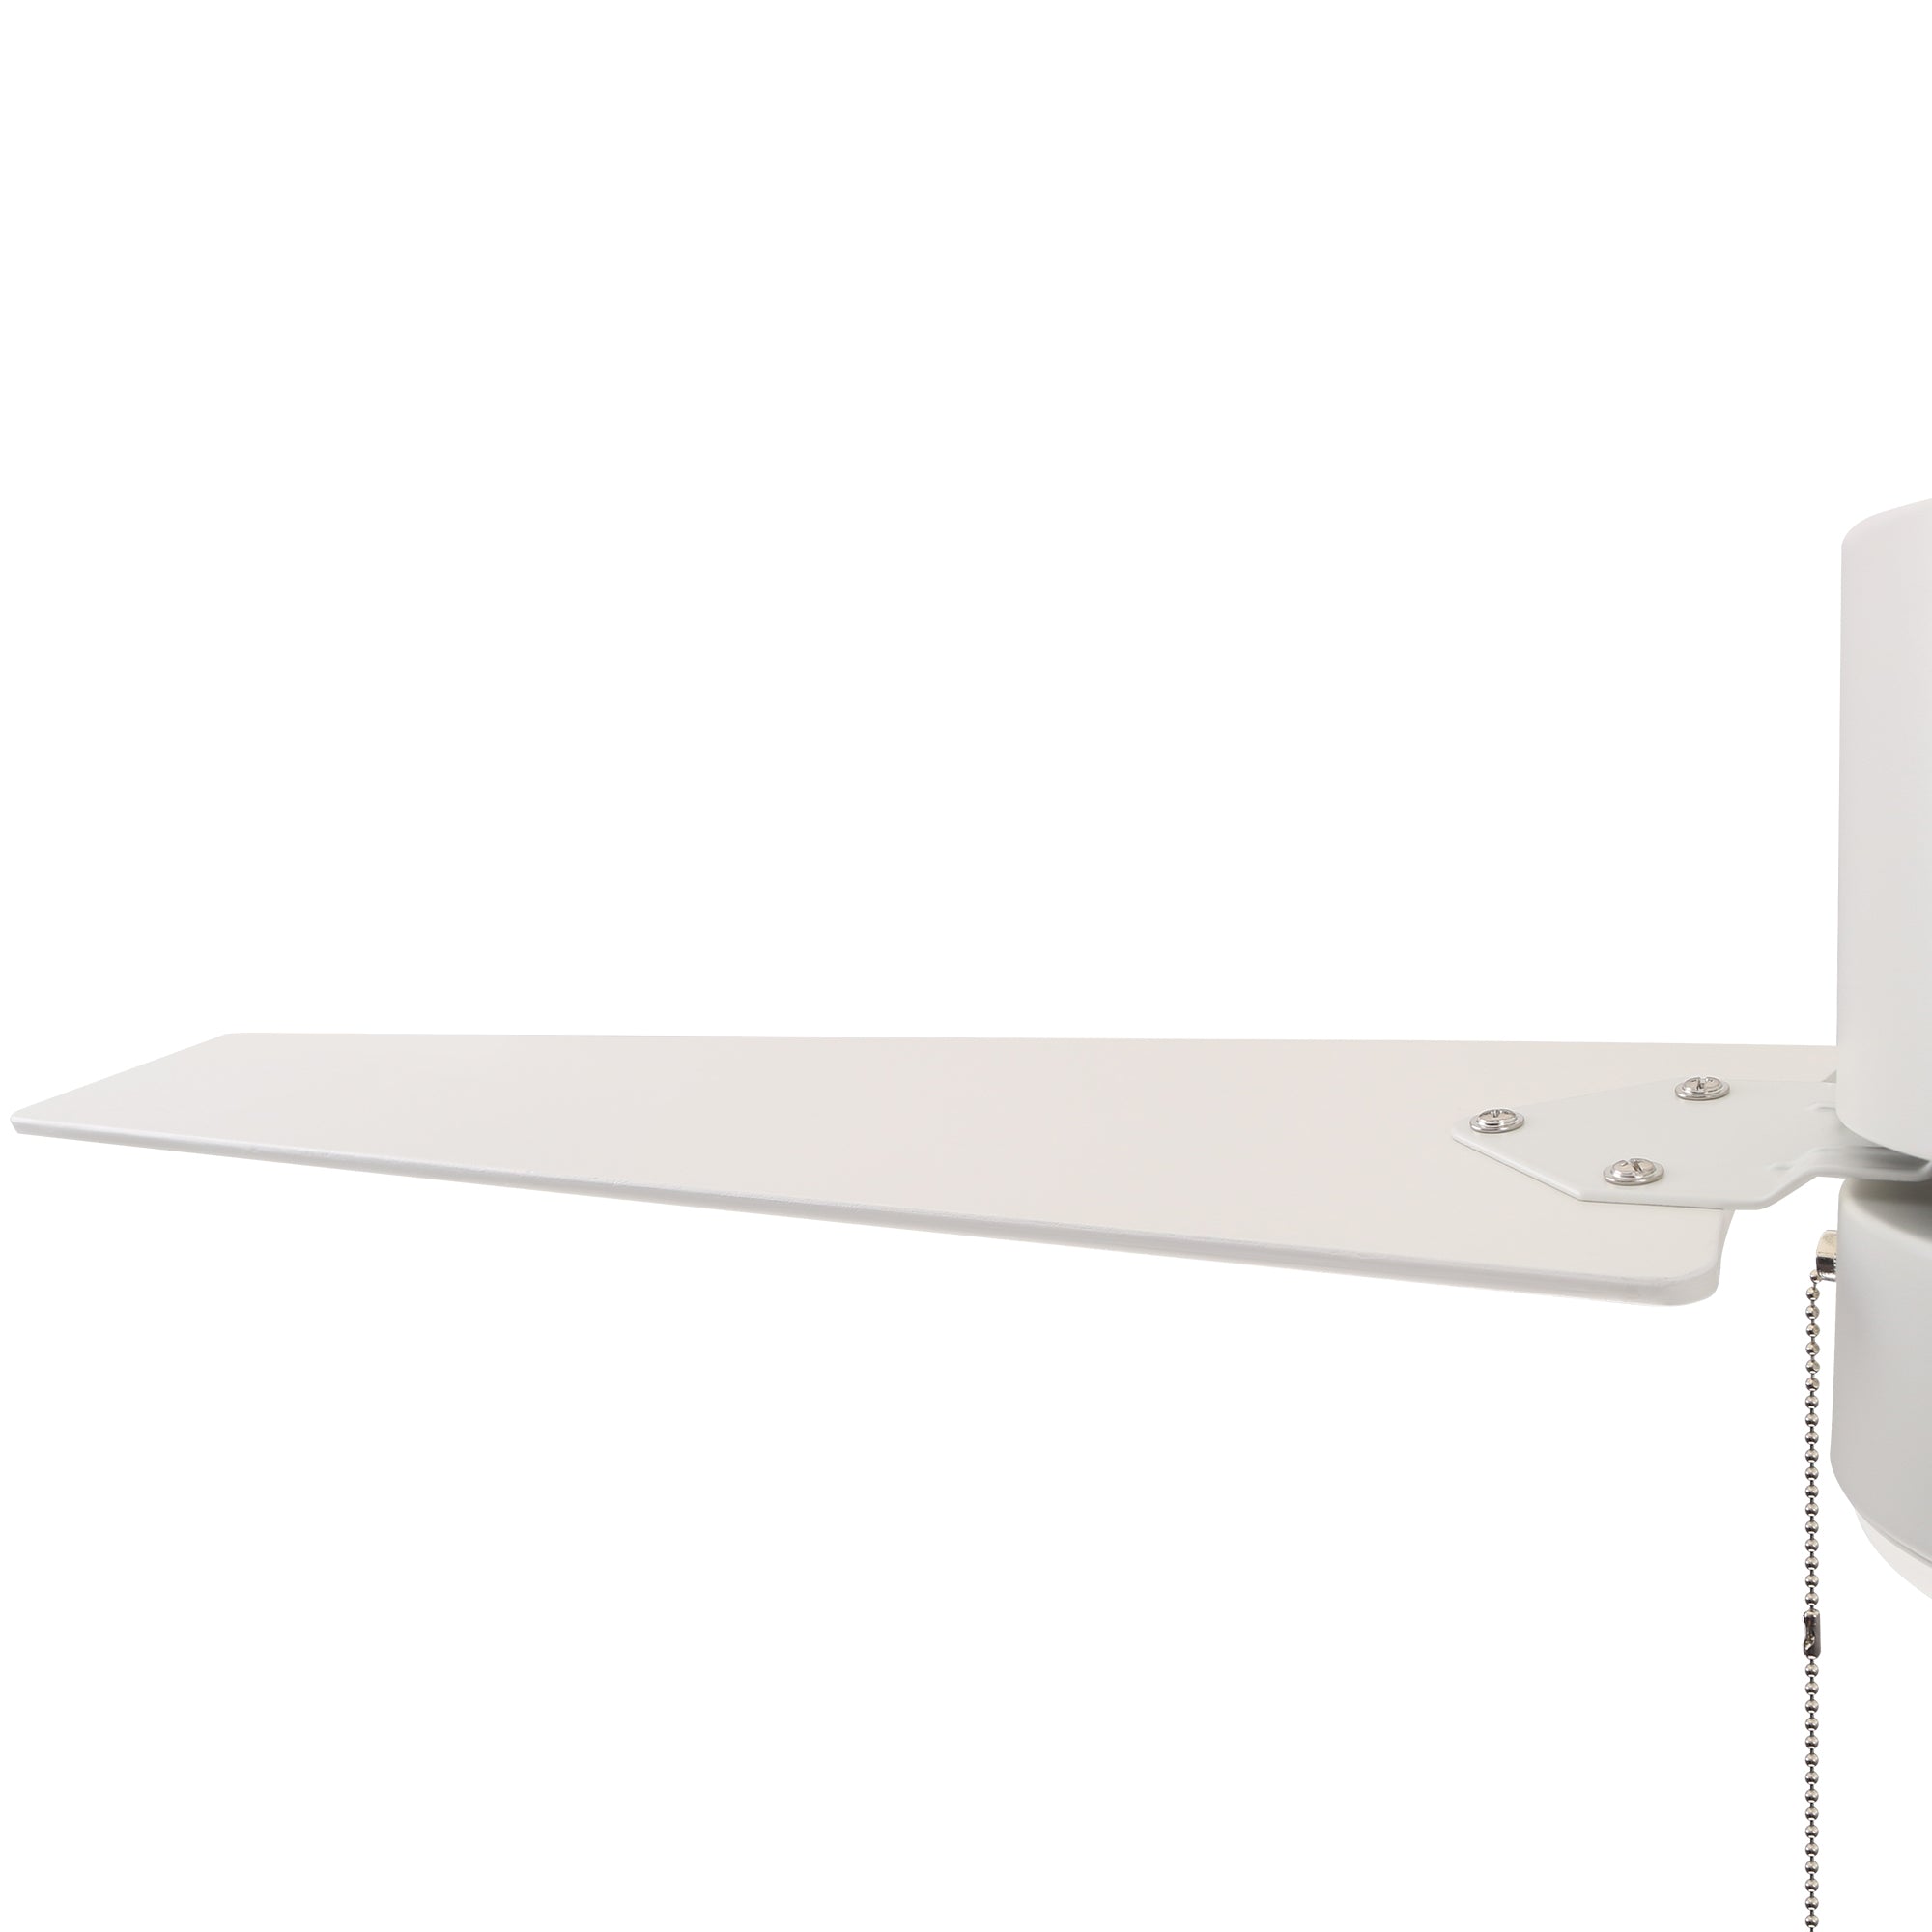 This Dulac 52''Ceiling Fan keeps your space cool, bright, and stylish. It is a soft modern masterpiece perfect for your large indoor living spaces. This Model ceiling fan is a simplicity designing with White finish, use elegant Plywood blades and has an integrated 3000K LED warm light. The fan feature the pull chain switches to set fan speeds and lighting On/Off. #color_white